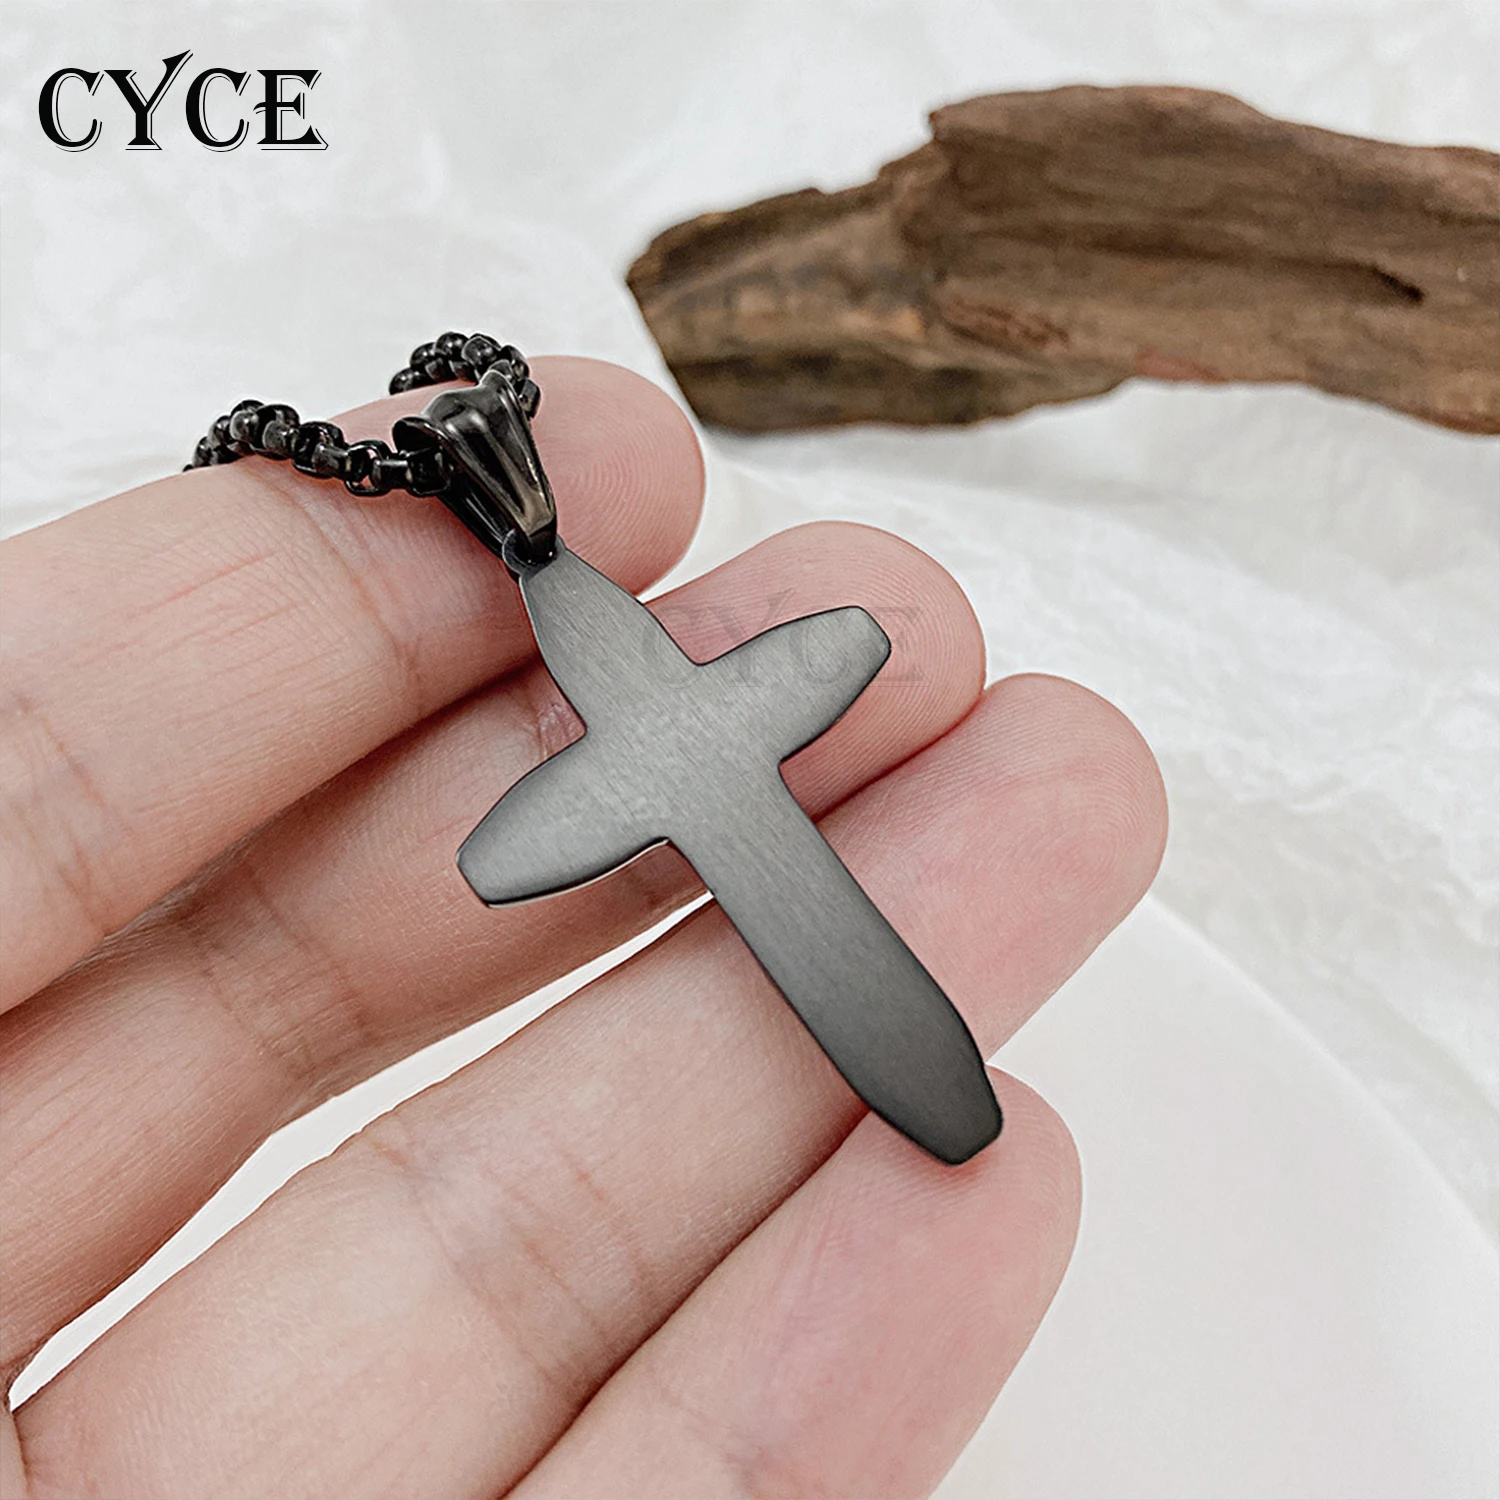 CYCE New Stainless Steel Cross Pendant Necklaces for Women Mens Hip Hop Jewelry Wild Titanium Steel Cross Necklace Accessories